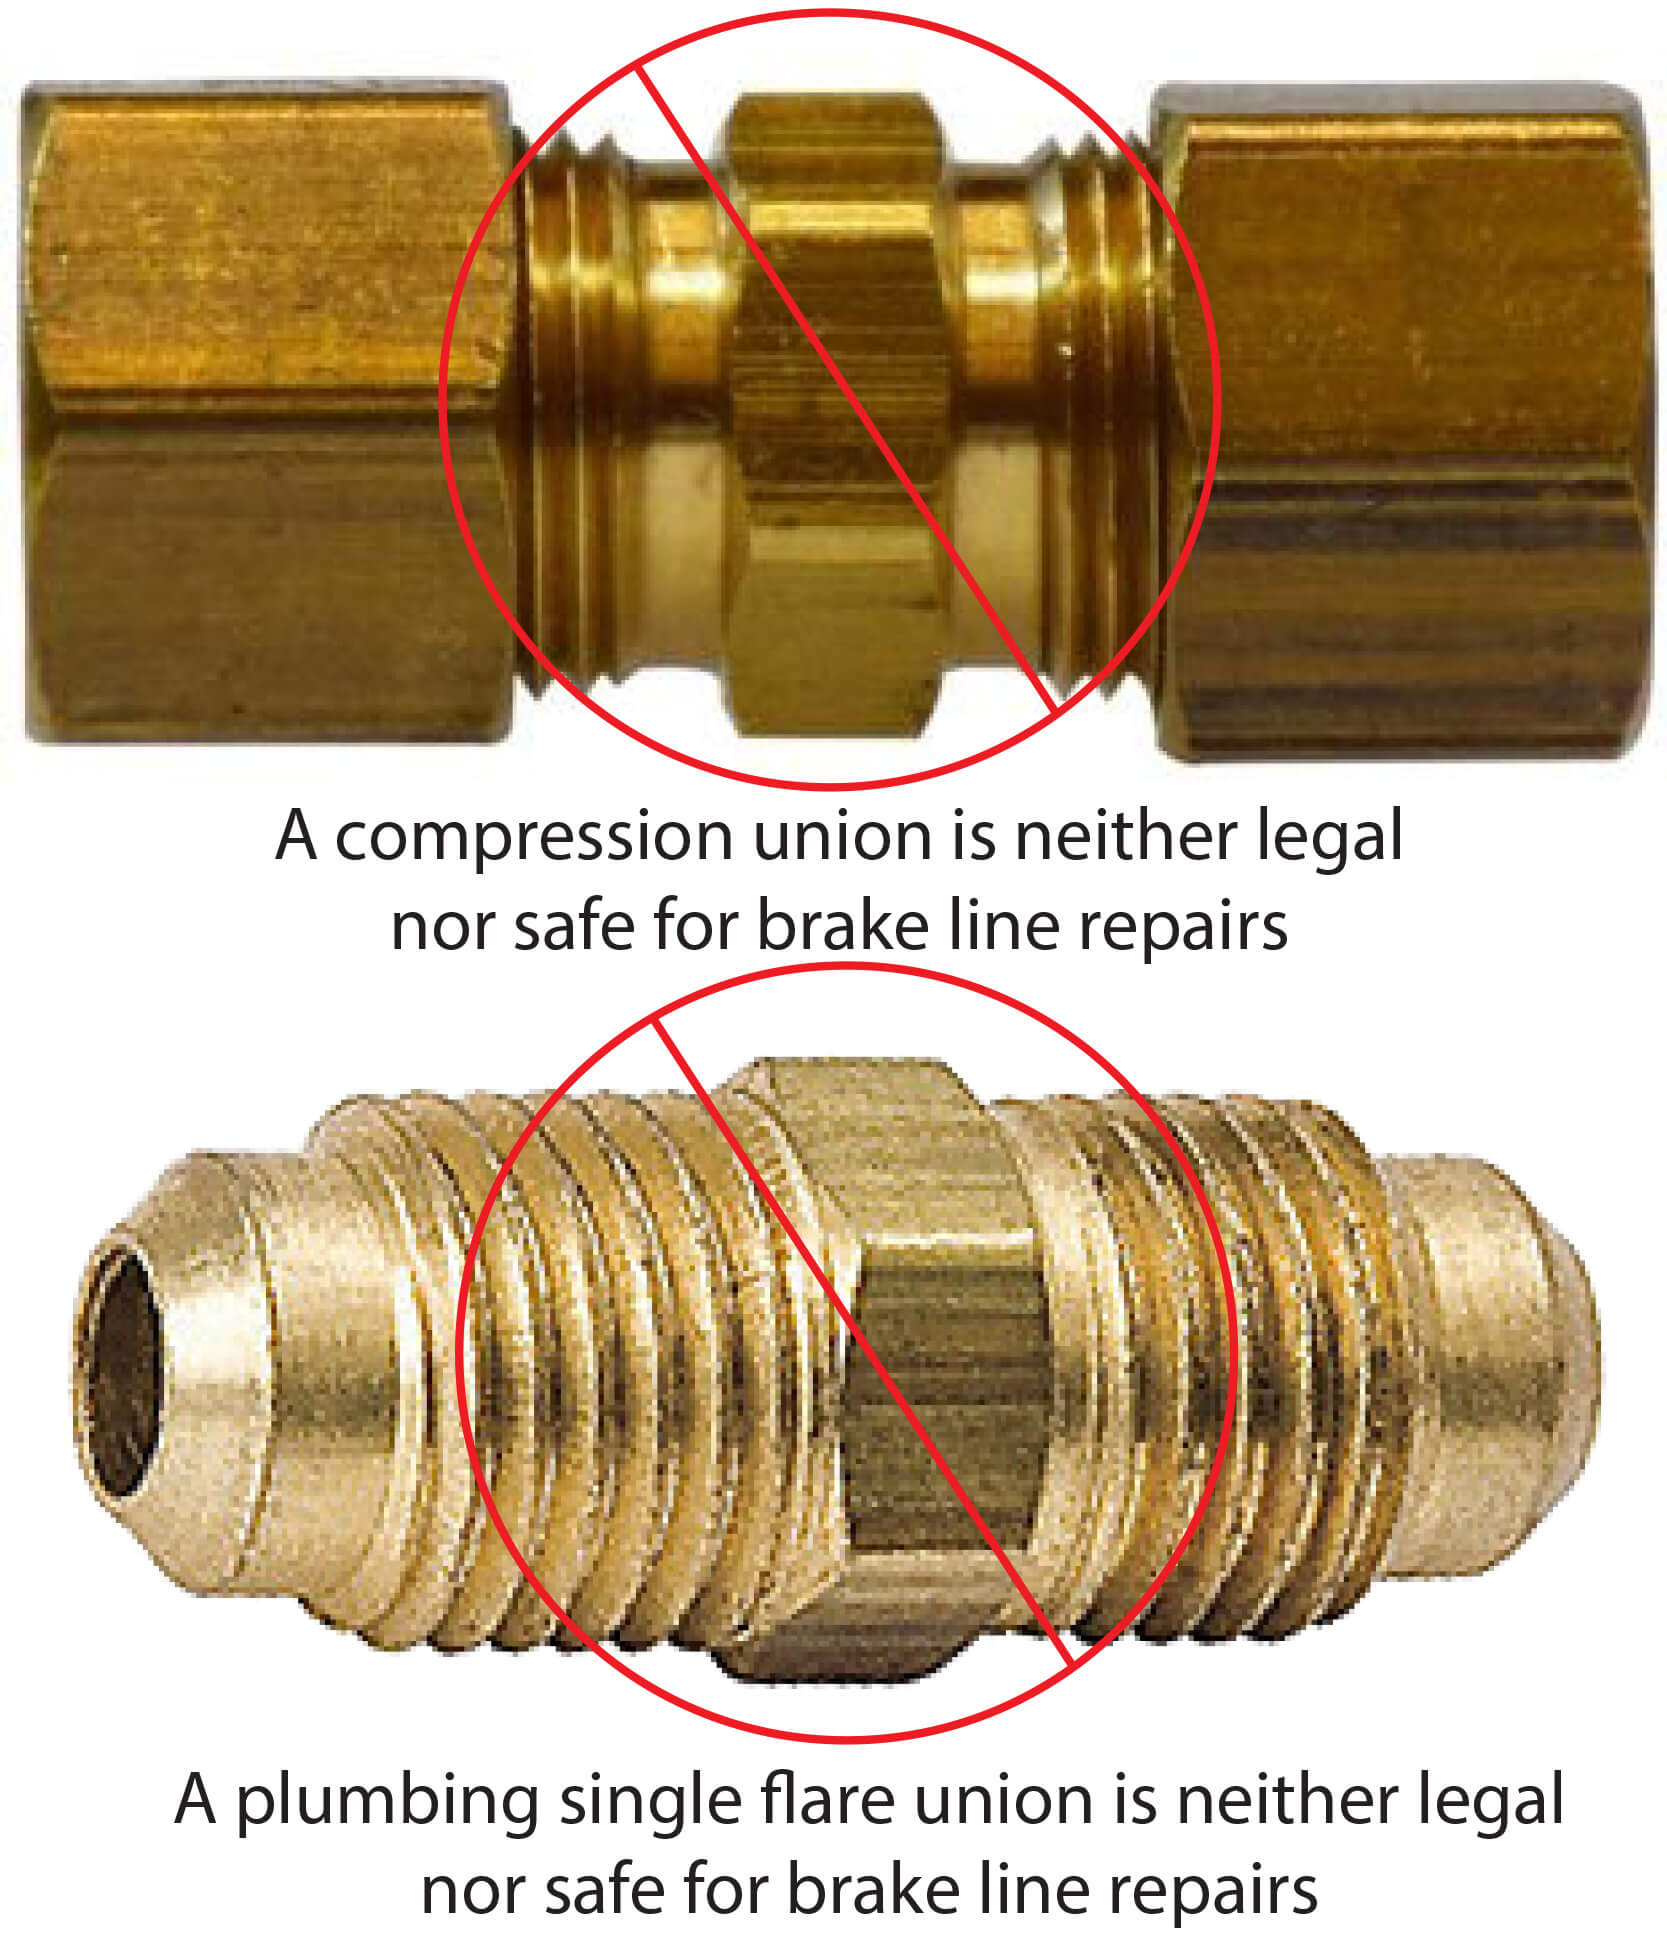 compression unions are illegal for brake line repairs